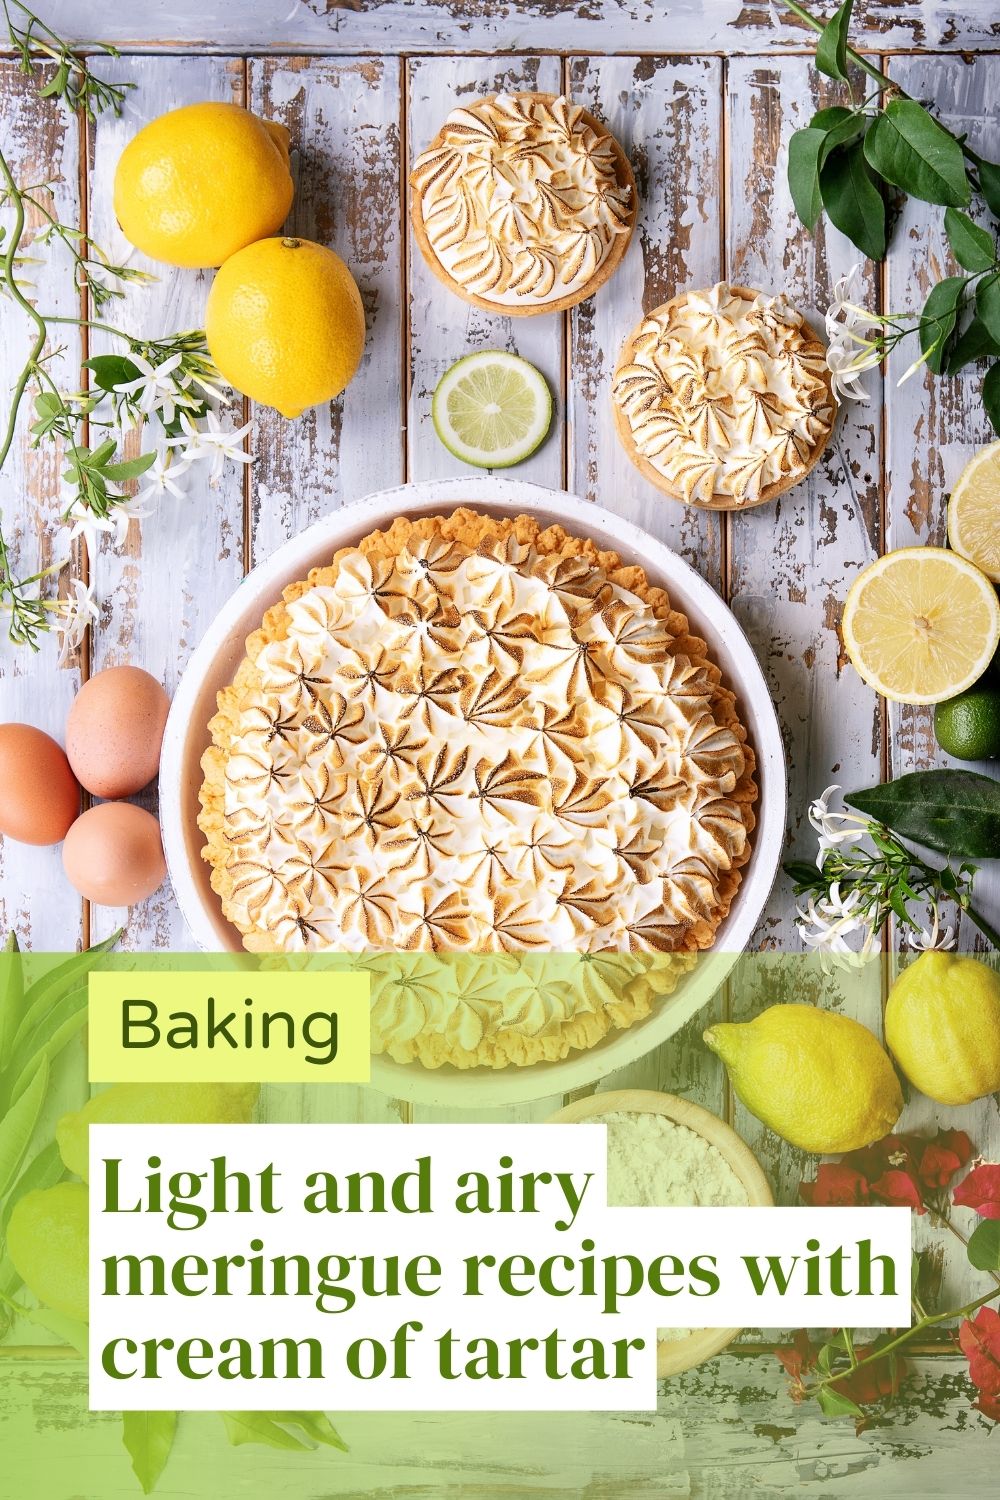 Light and airy meringue recipes with cream of tartar